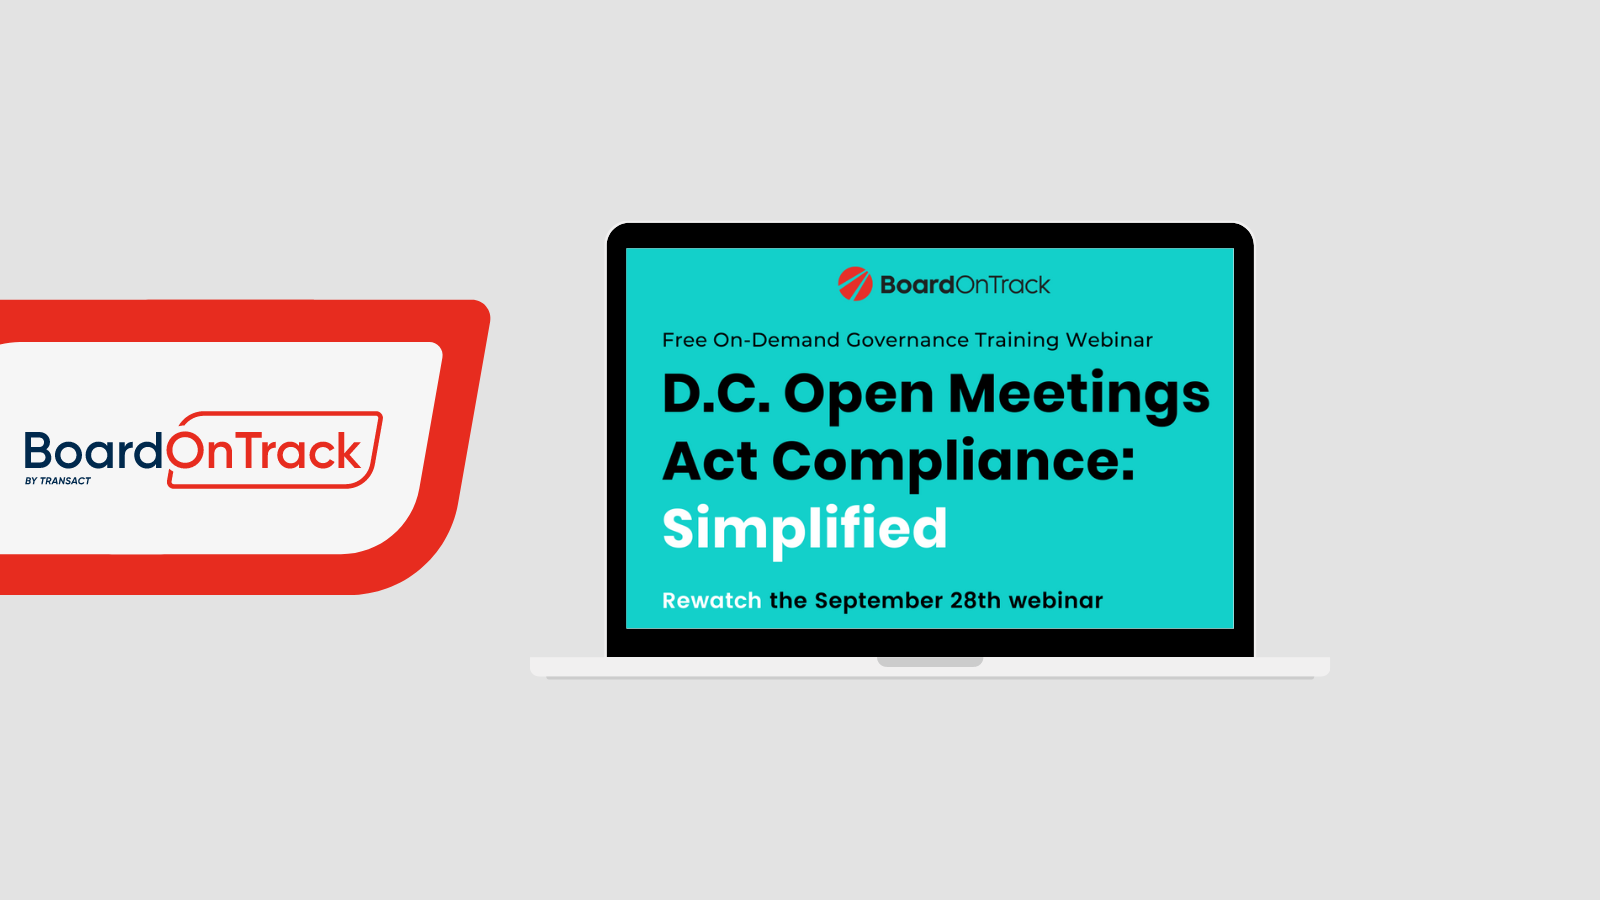 D.C. Open Meetings Act Compliance: Simplified for Charter Schools